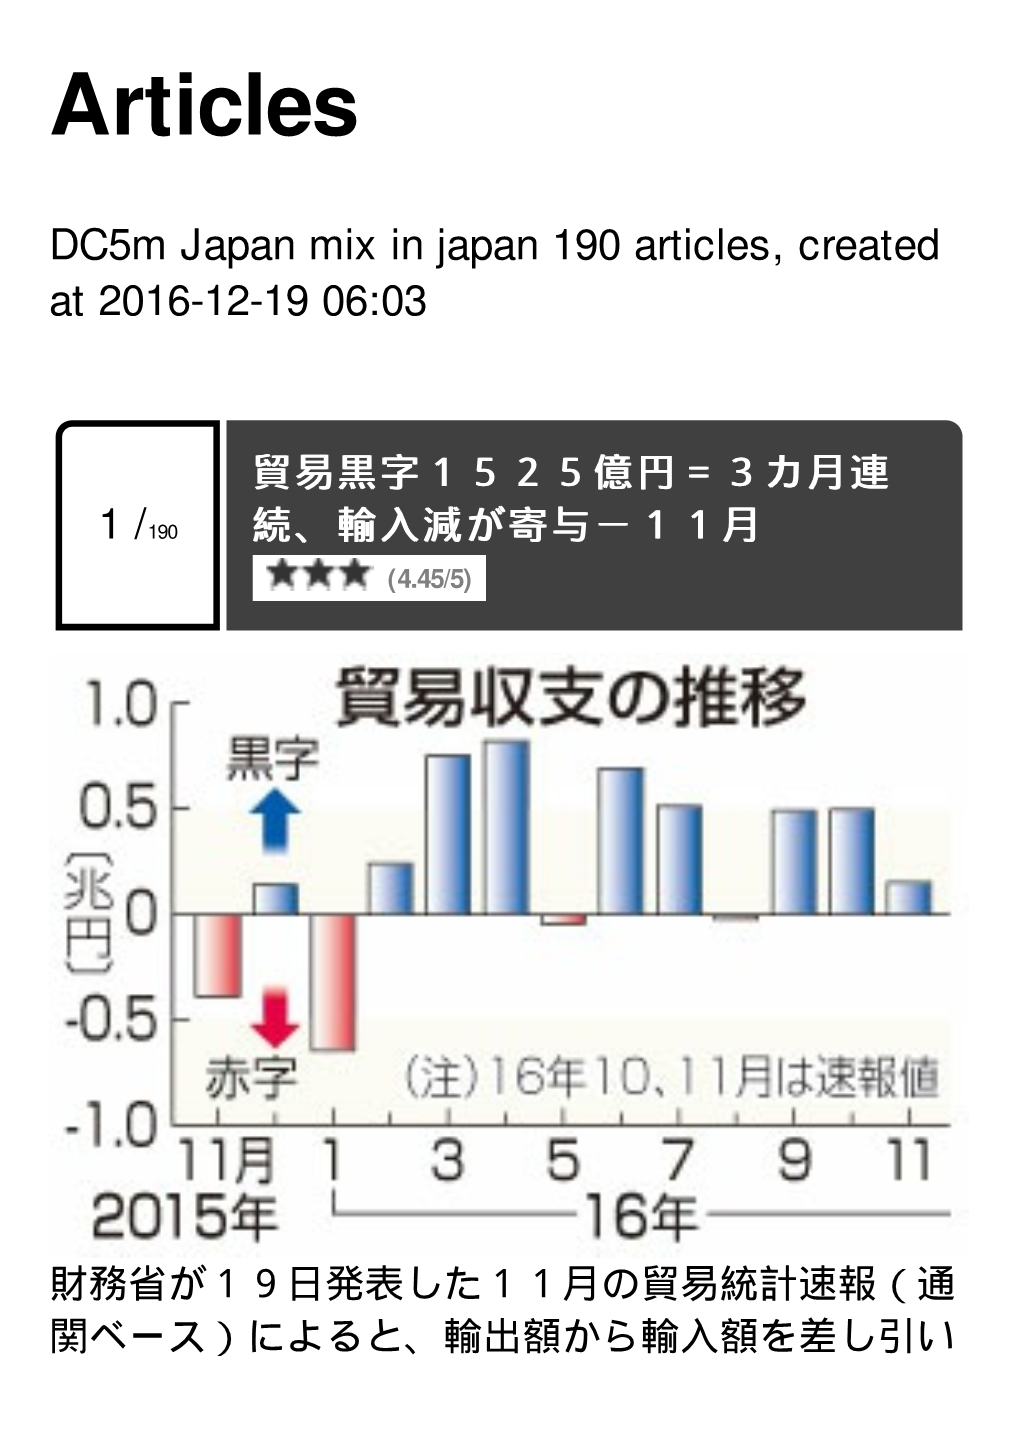 Dc5m Japan Mix in Japan Created at 2016-12-19 06:03